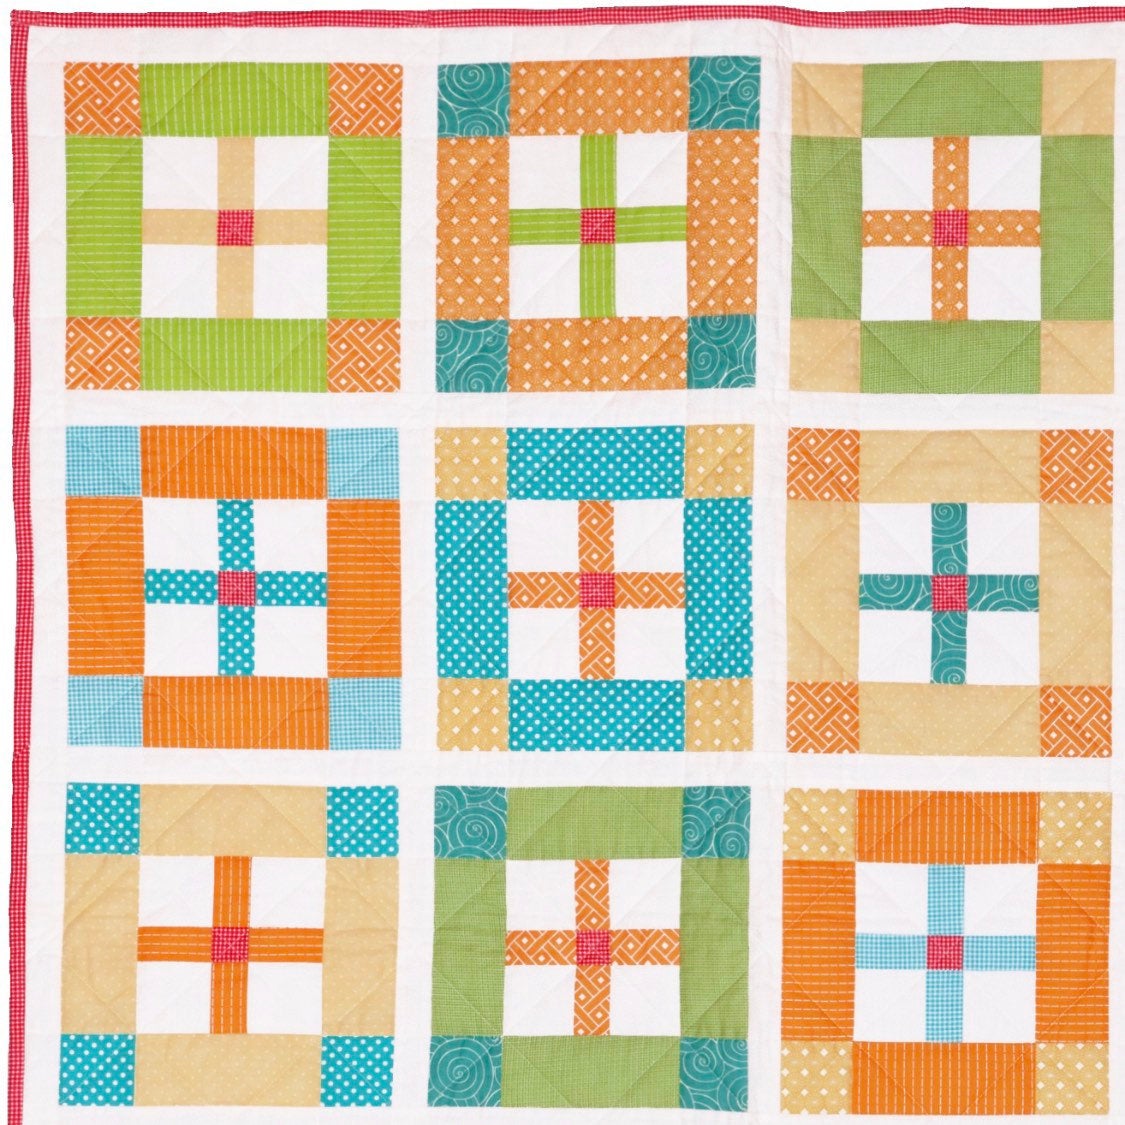 Angus's Cot Quilt Pattern - PDF